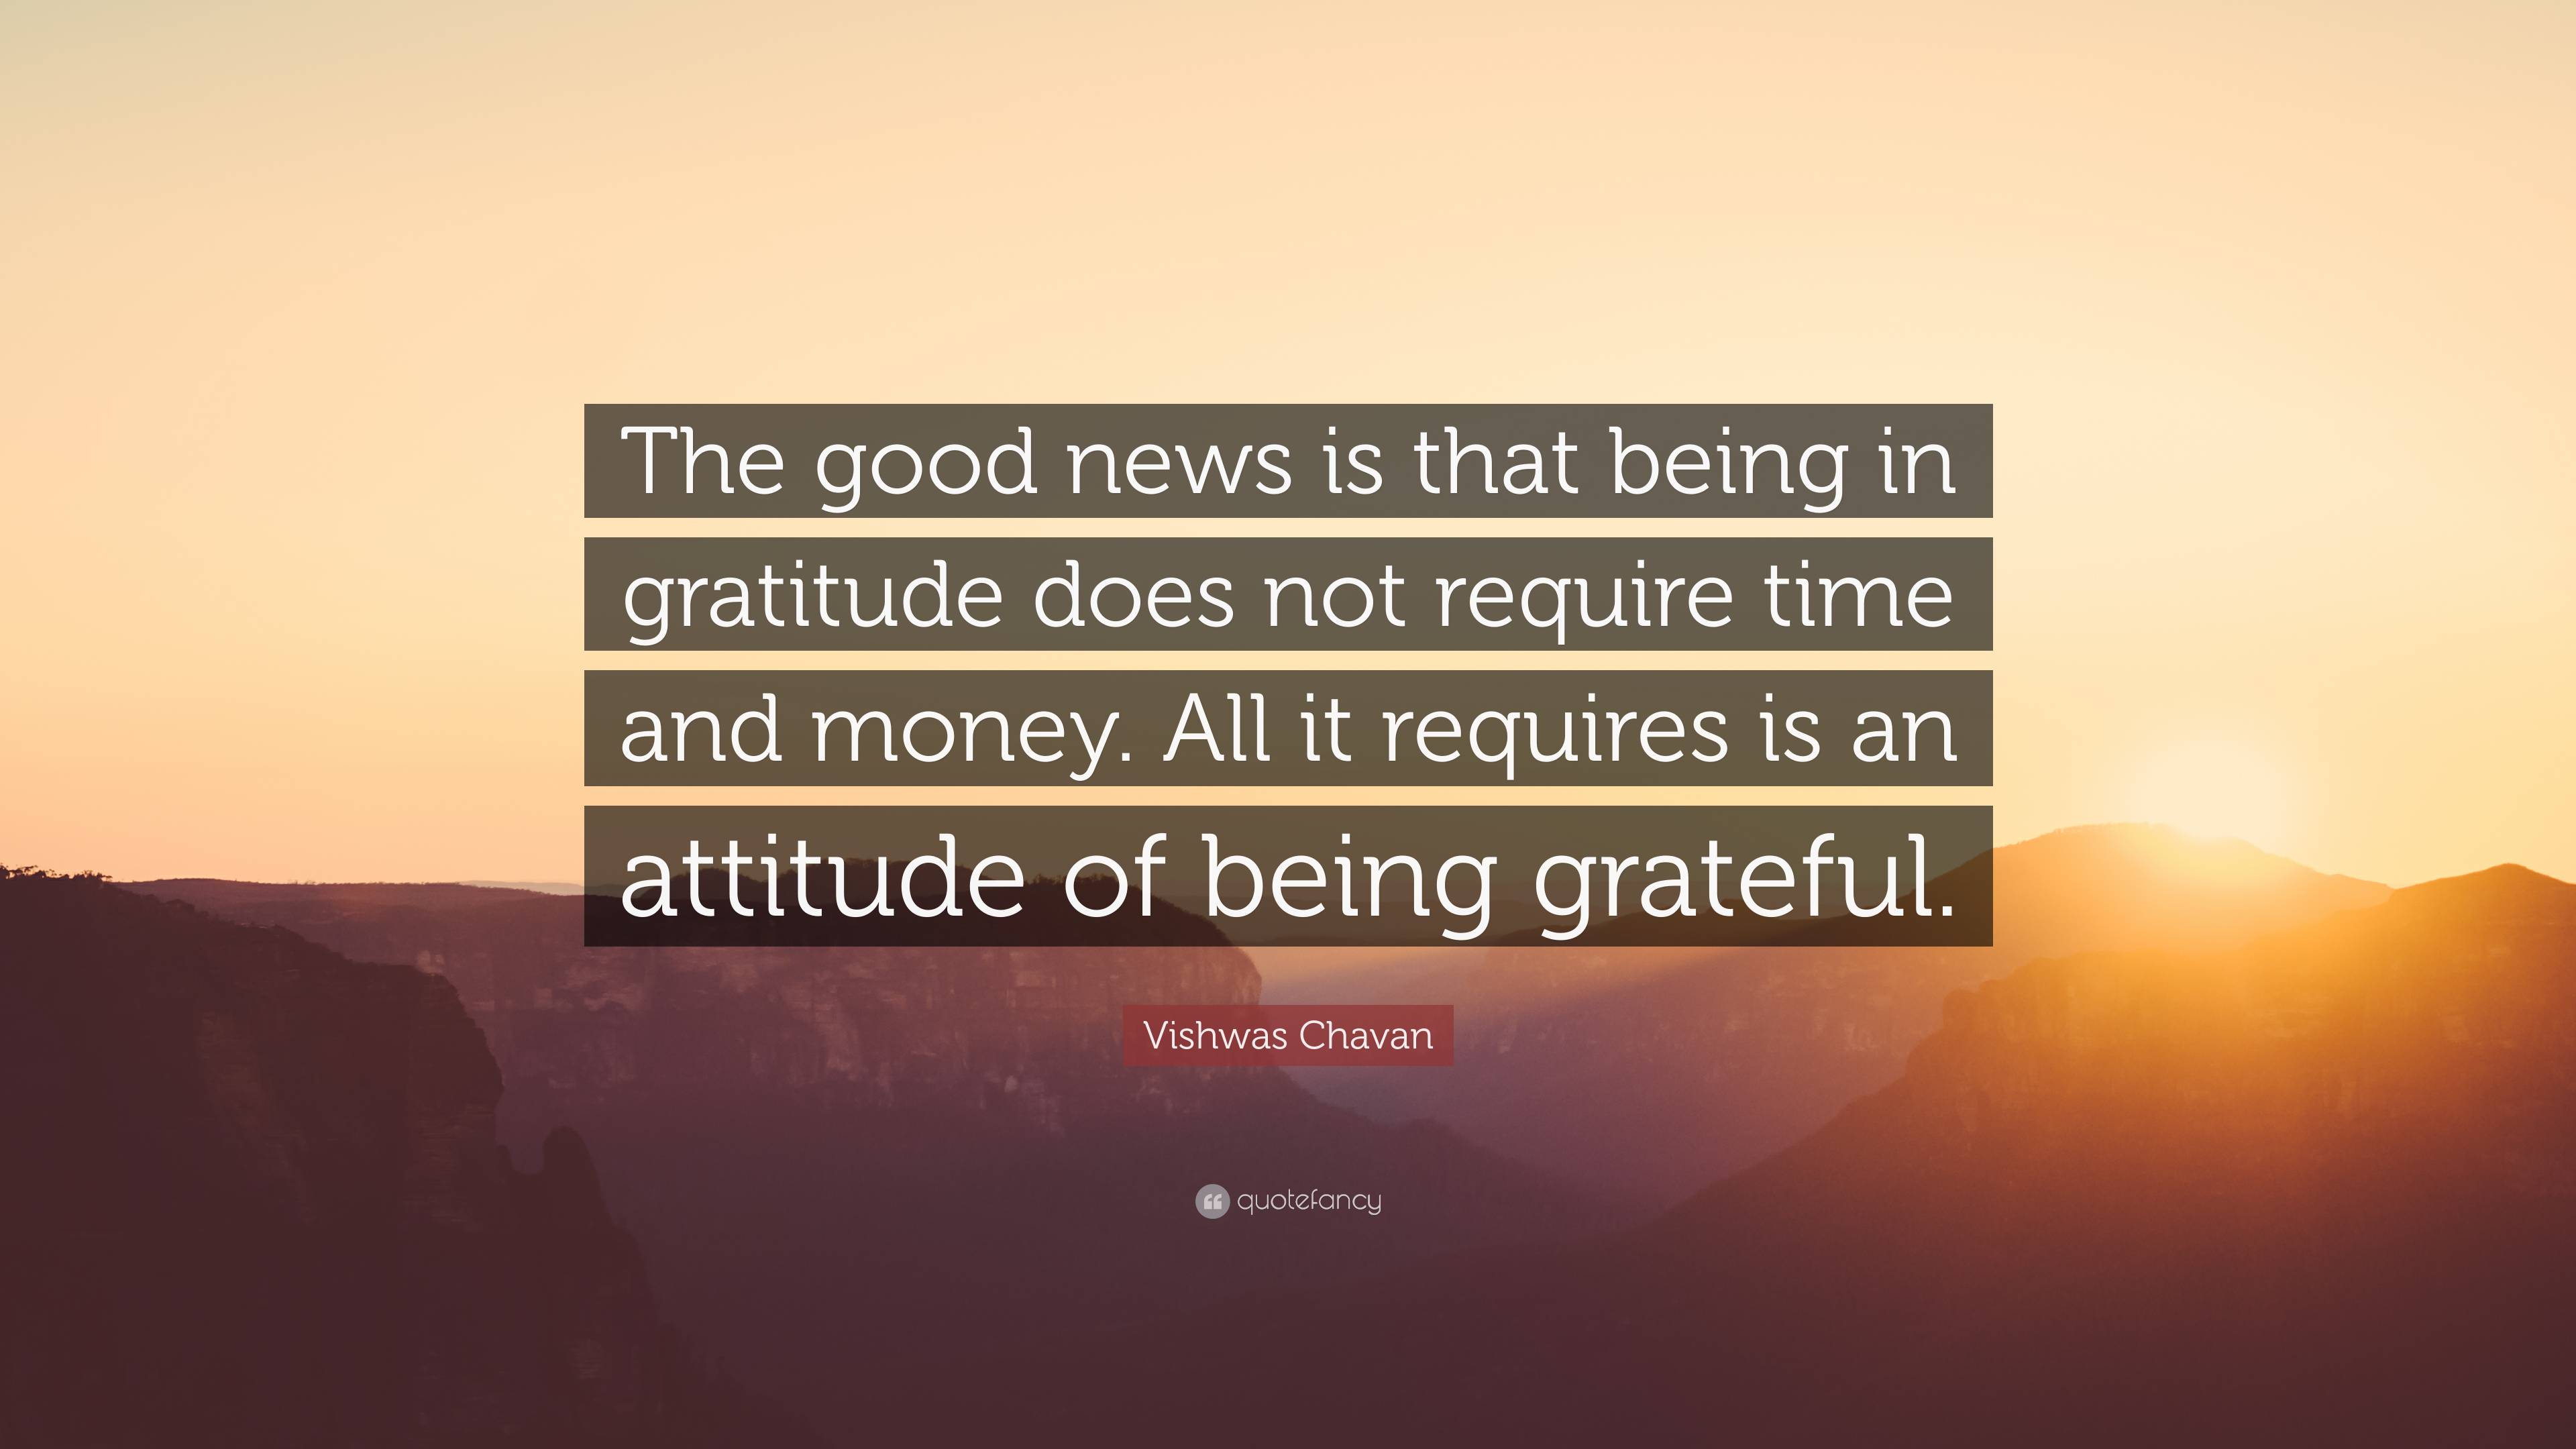 Be Grateful. Not Just In Good Times, But At All Times.